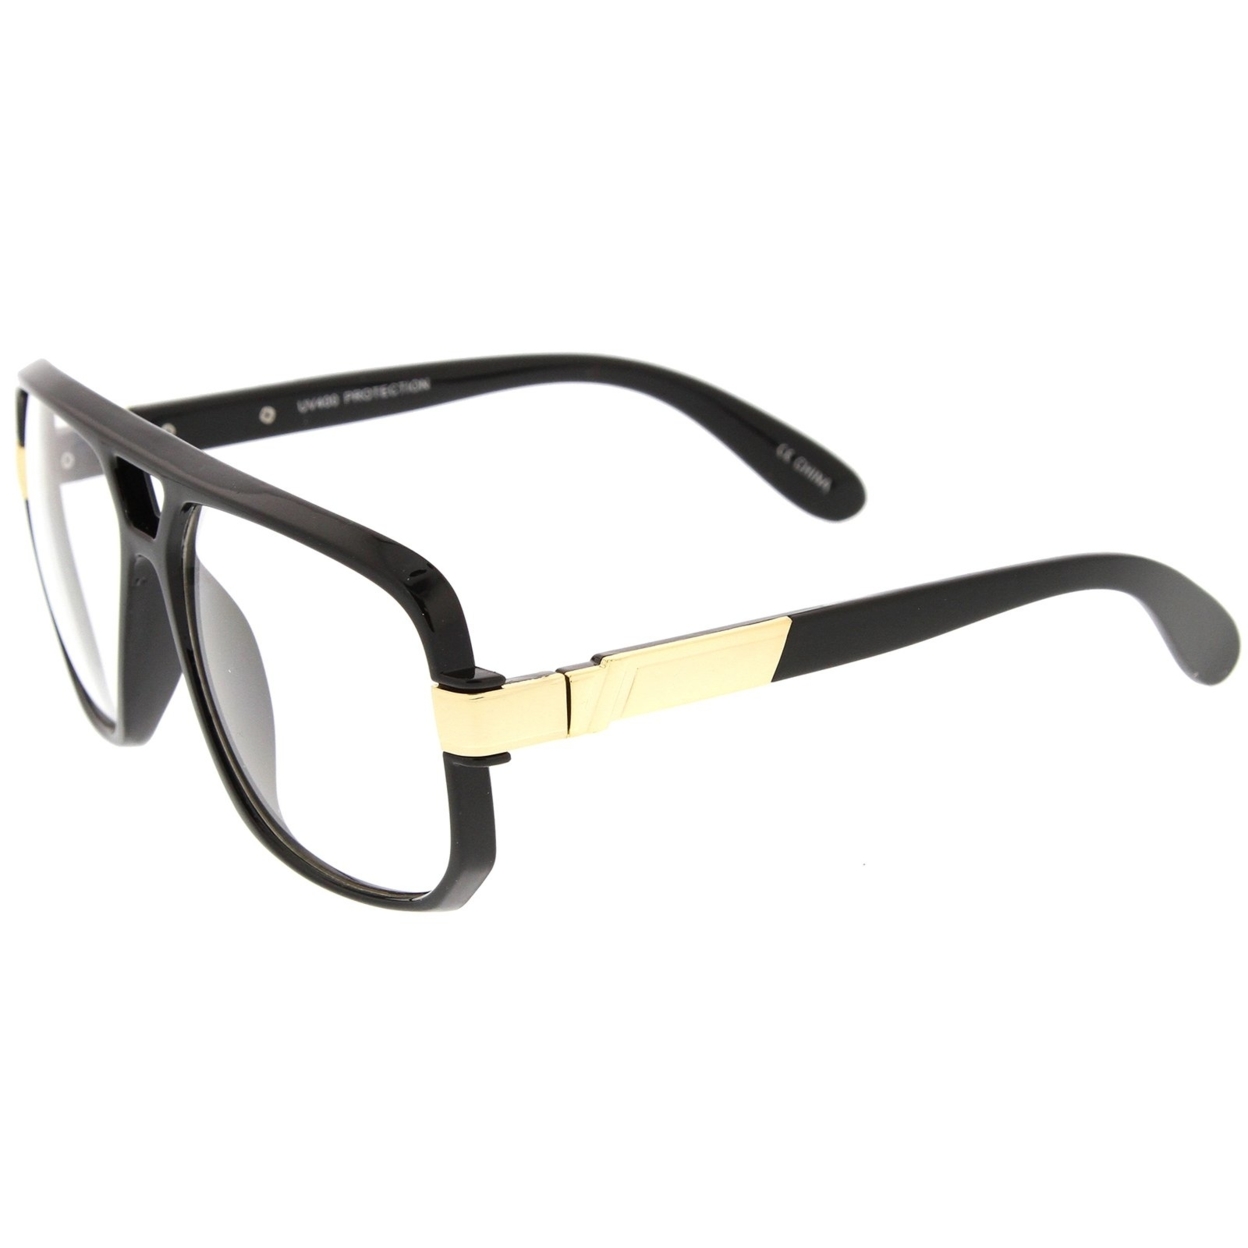 Classic Flat Top Metal Accented Temples Clear Lens Square Aviator Glasses 56mm - Shiny Black-Gold / Clear